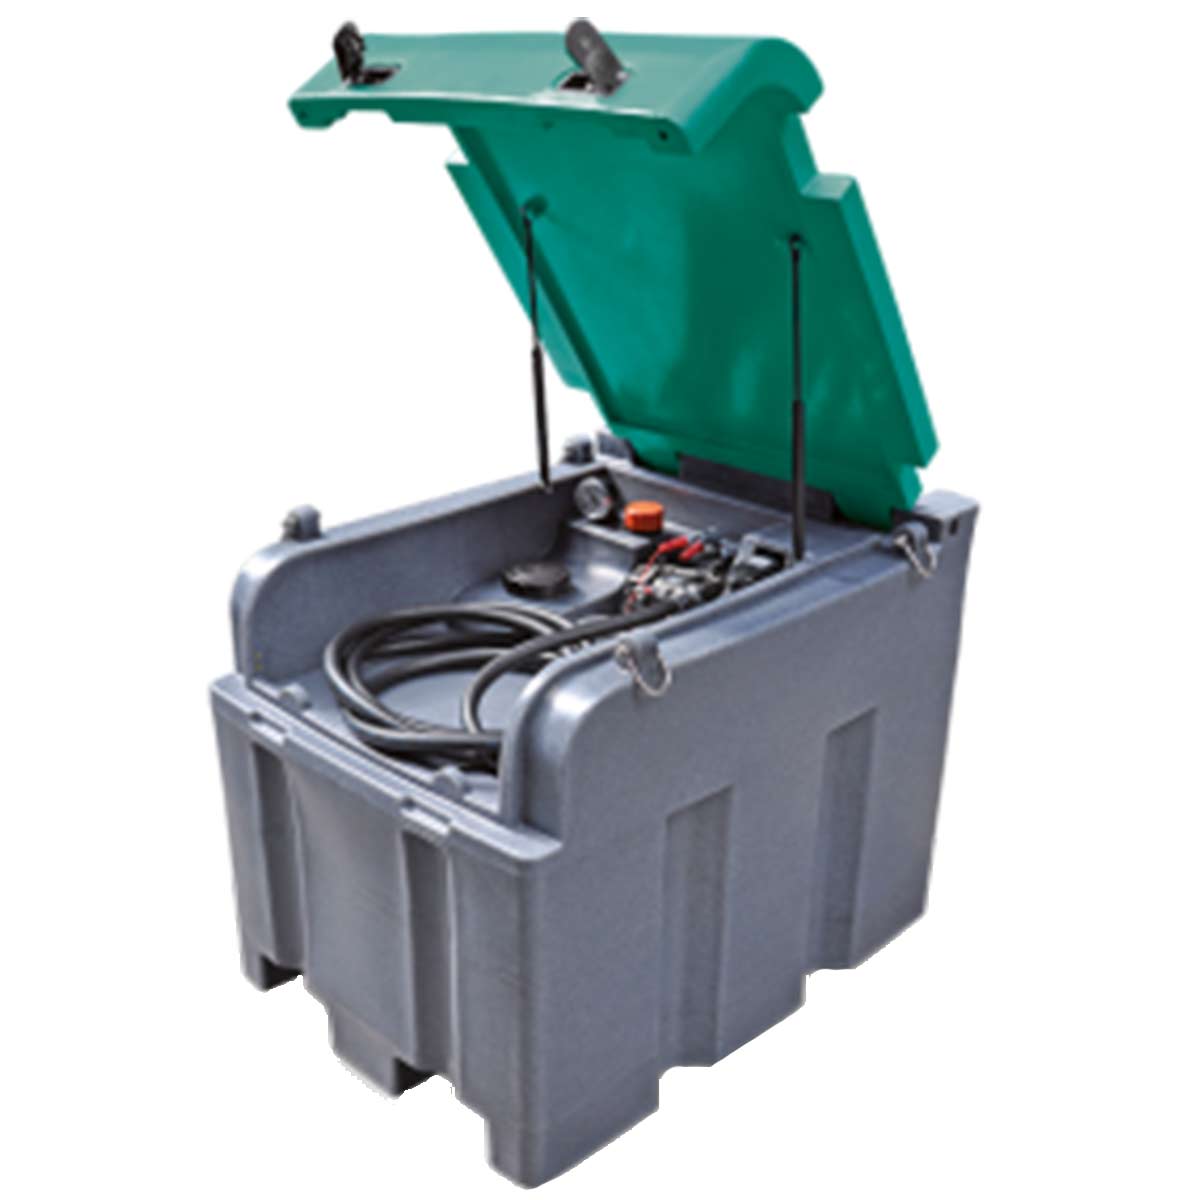 Mobile diesel tank unit with electric pump 12v, 50l/min and hinged lid